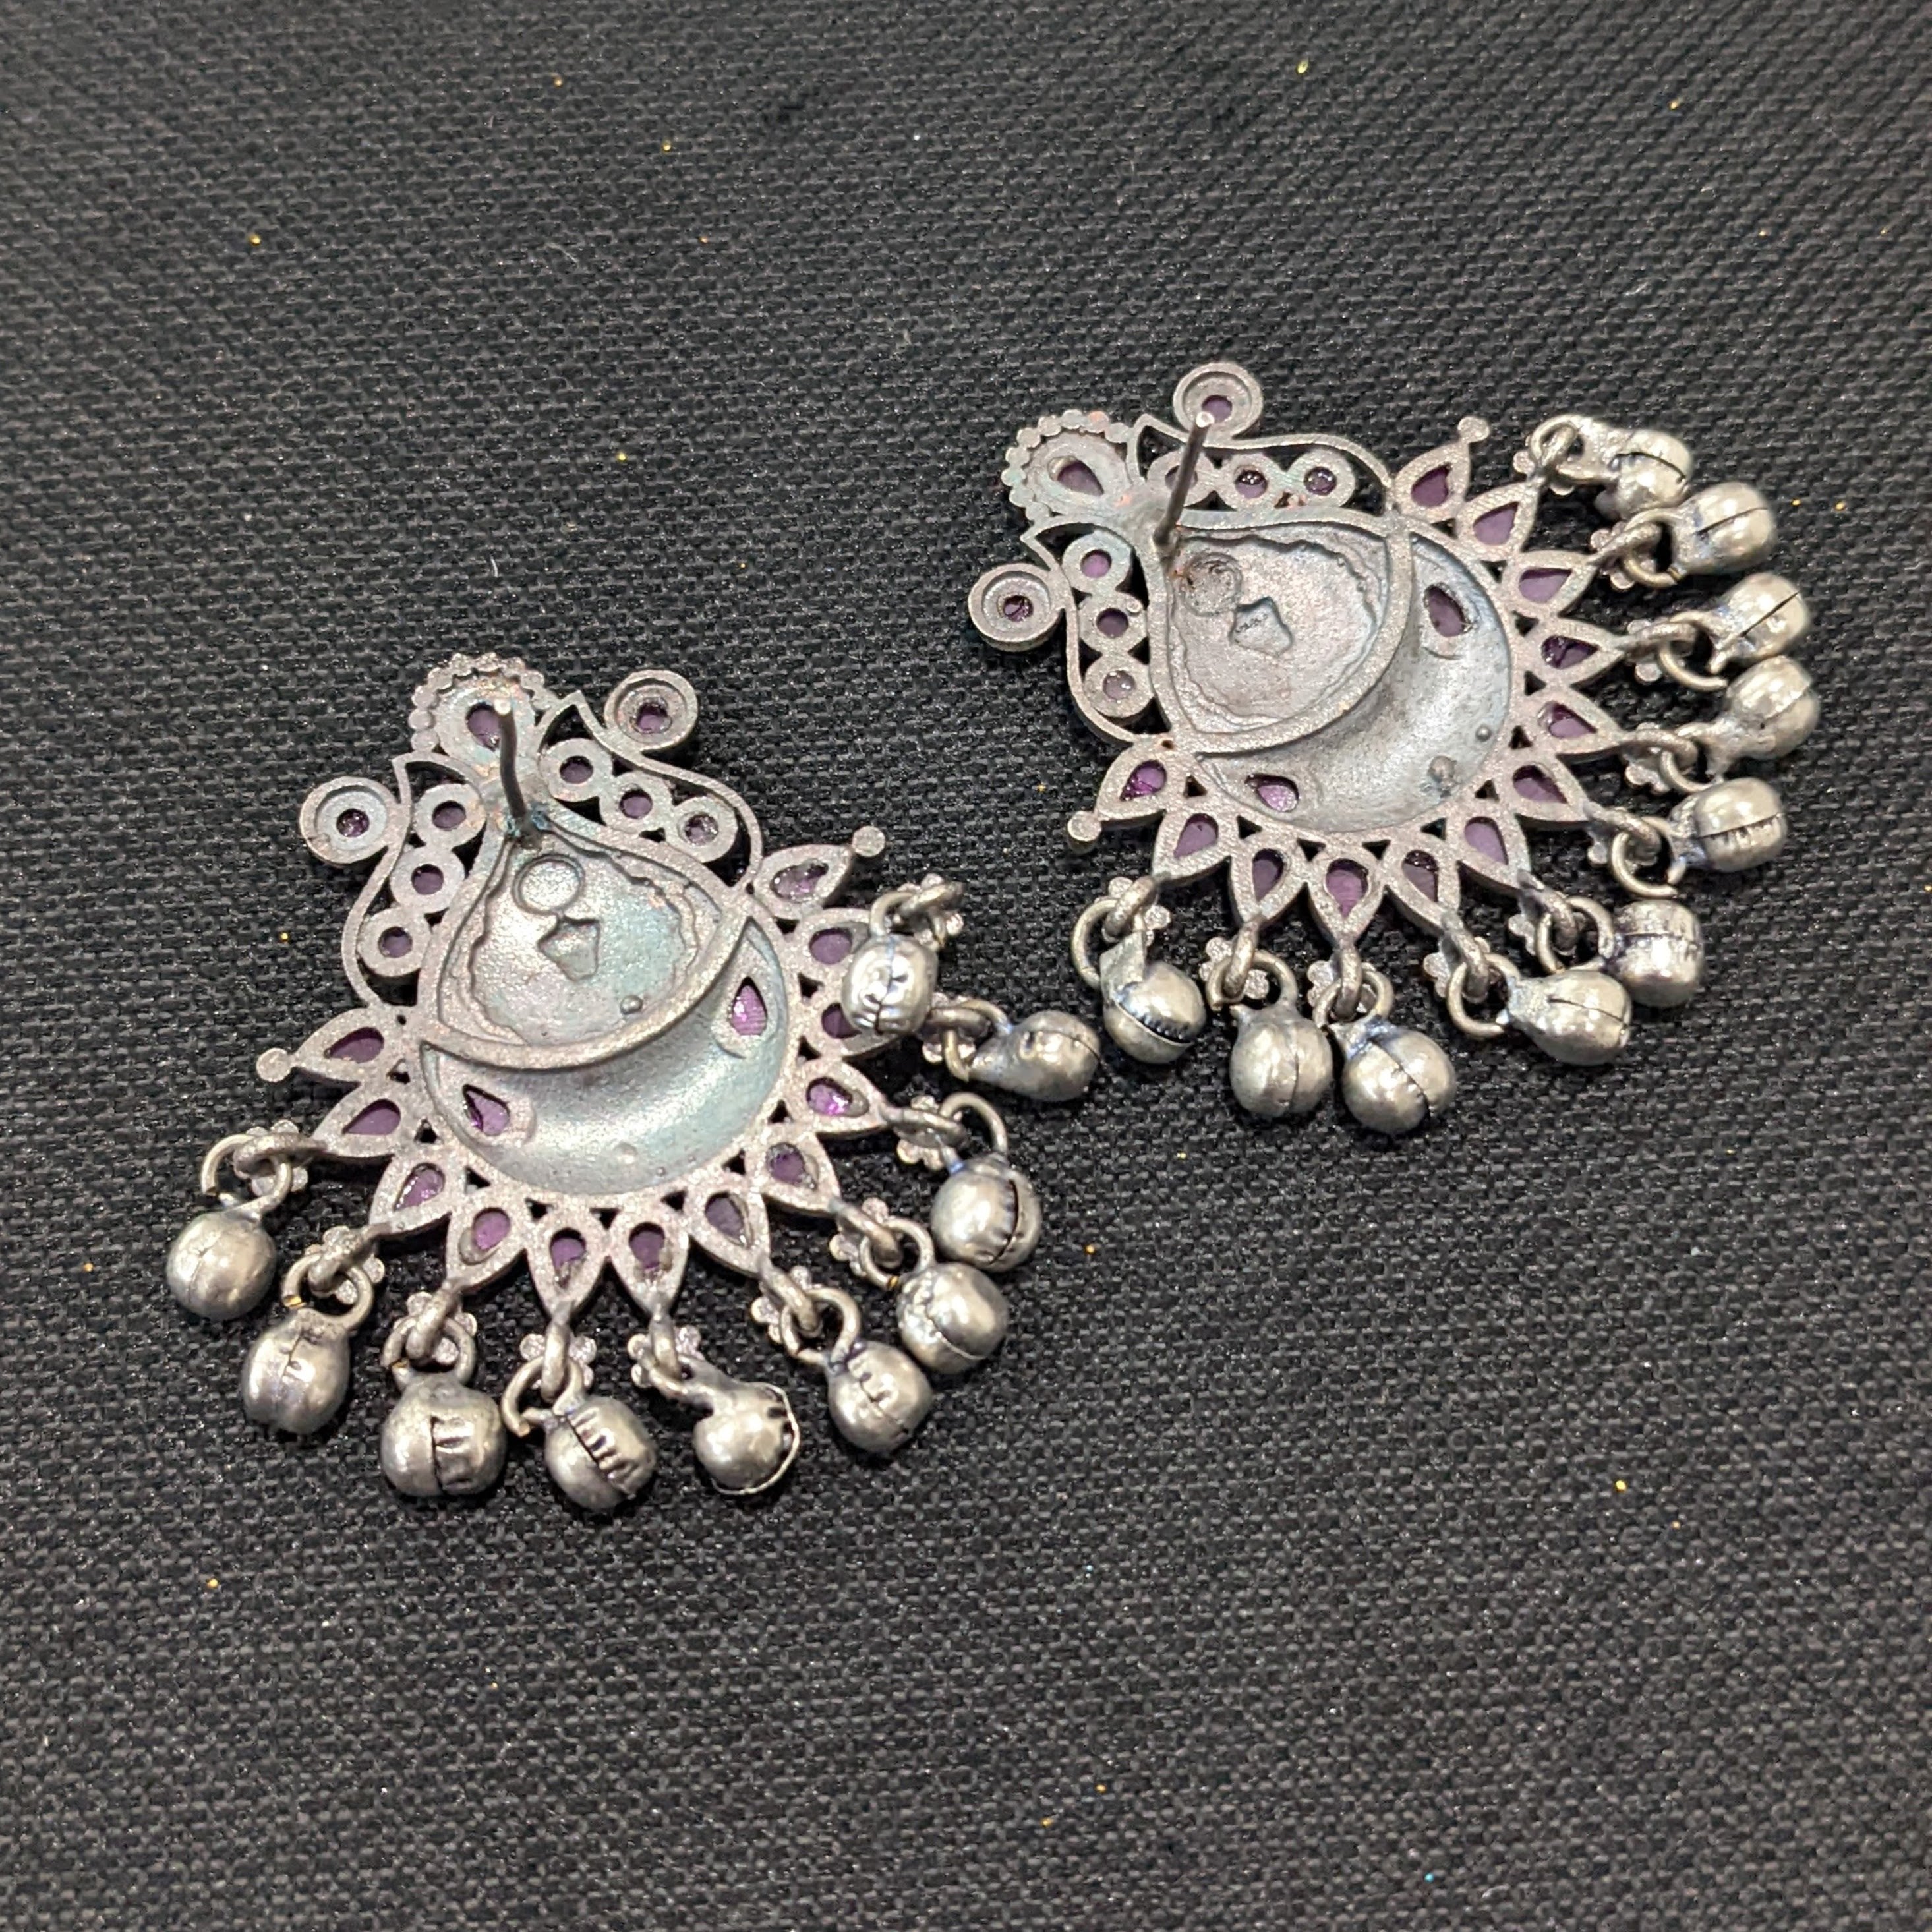 Green Stone Embellished German Silver Earrings With Hanging Pearls at Rs  189.00 | Gurgaon| ID: 27302450862